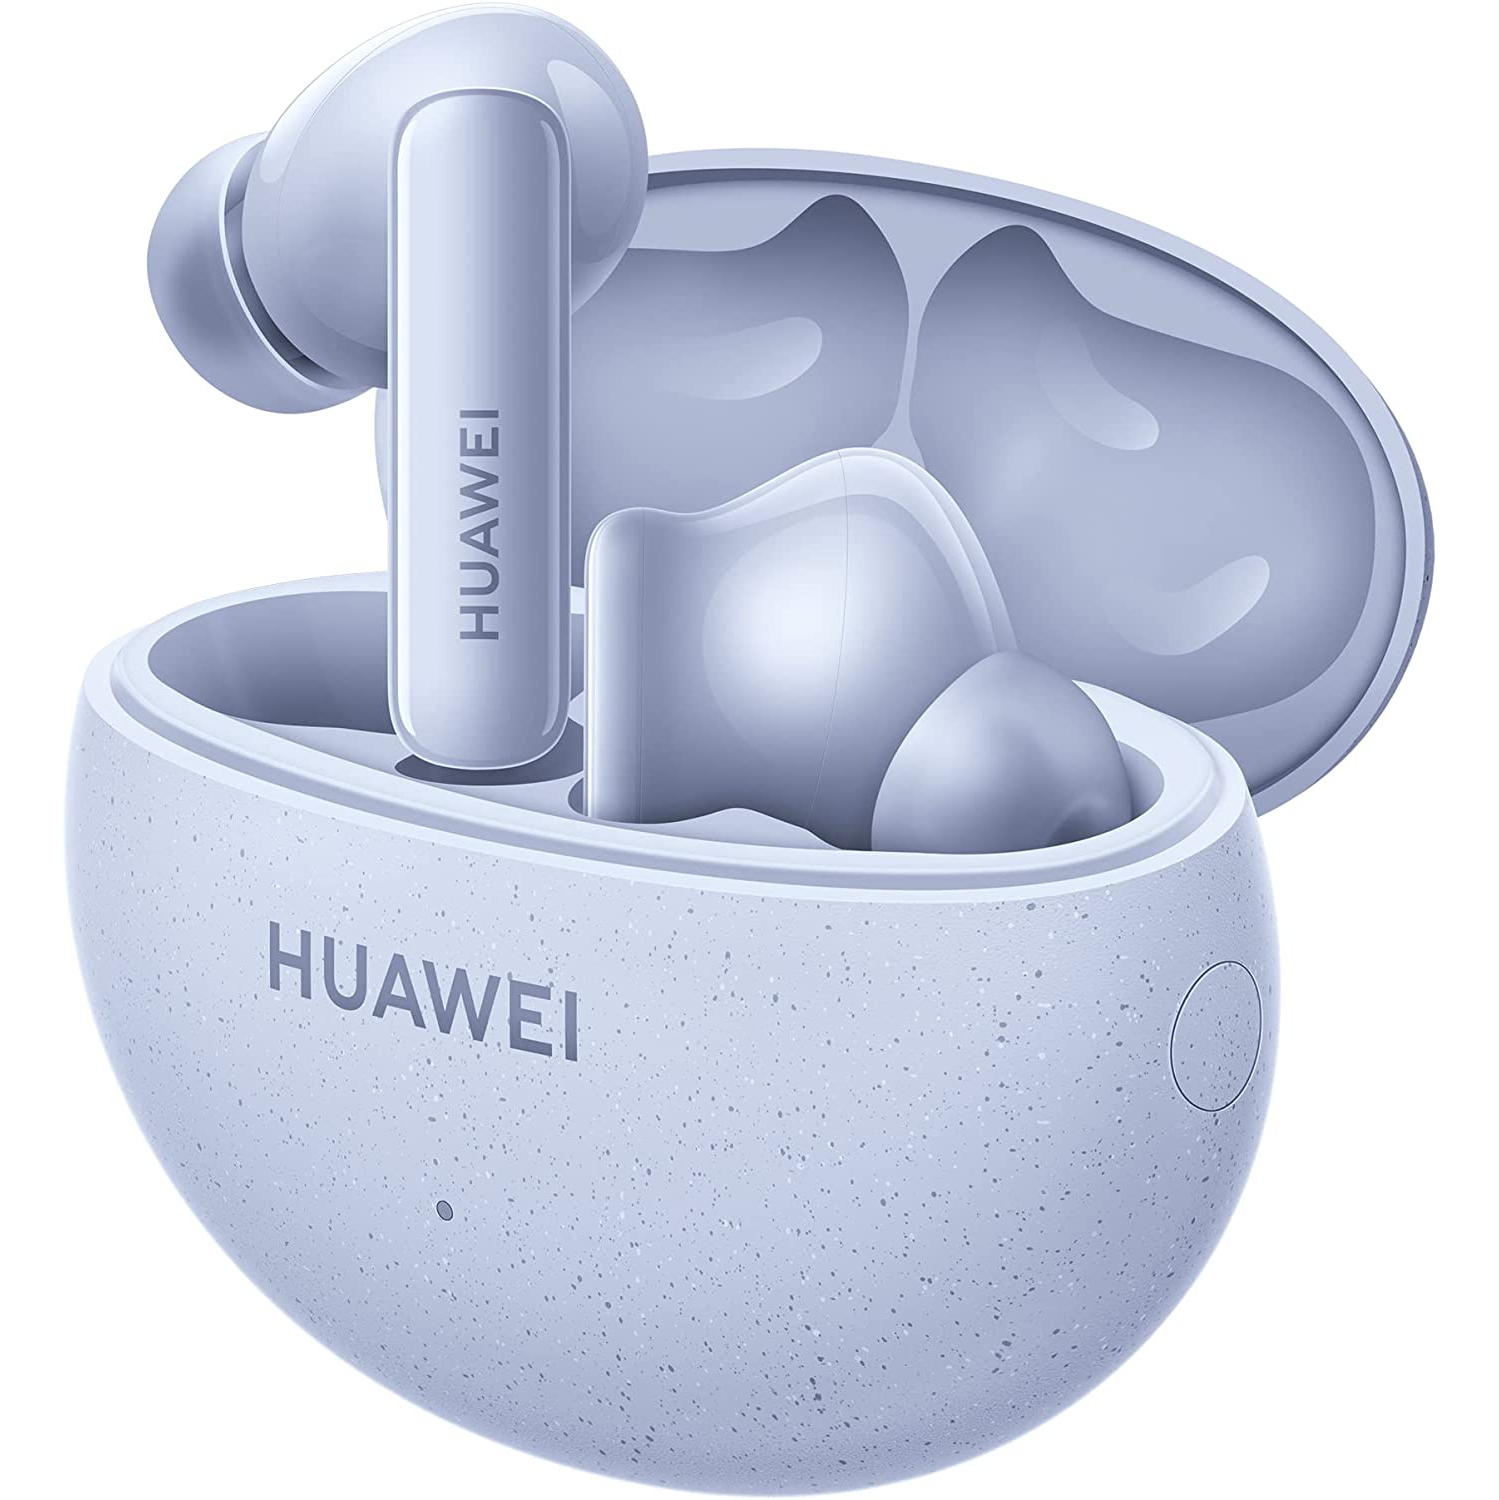 HUAWEI FreeBuds 5i Wireless Earphone - TWS Bluetooth Earbuds, Hi-Res sound, multi-mode noise cancellation, 28 hr battery life, Dual device connection, Isle Blue